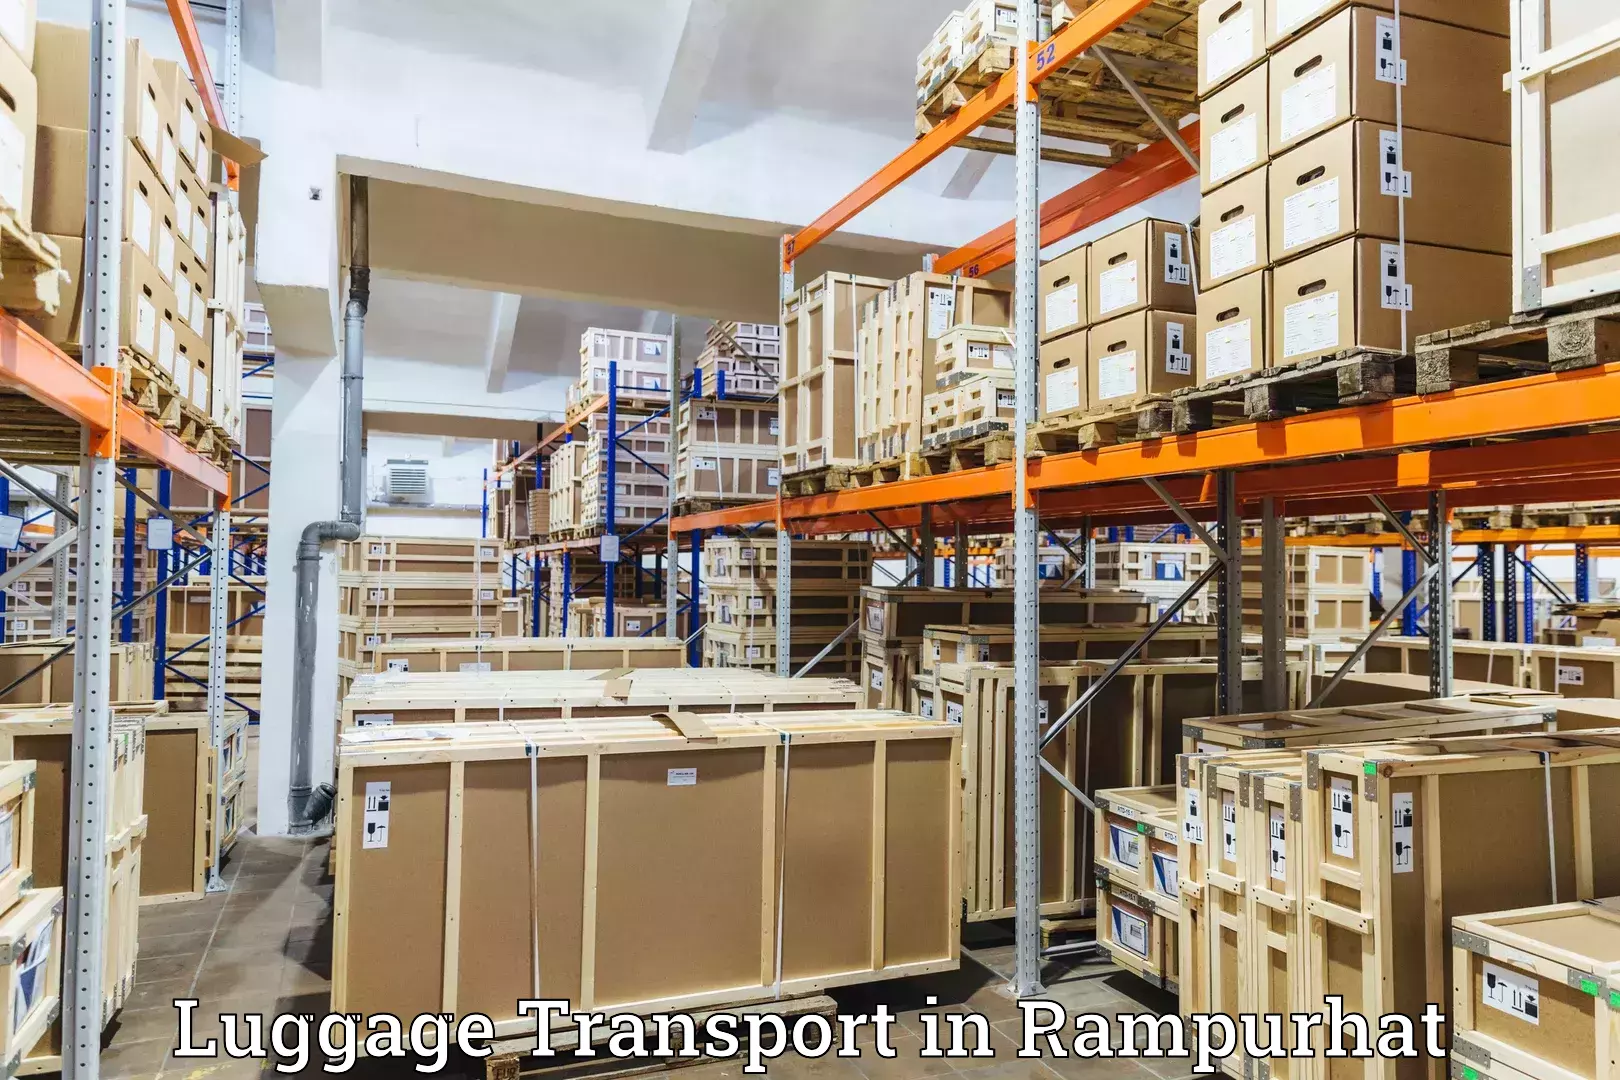 Luggage transport consultancy in Rampurhat